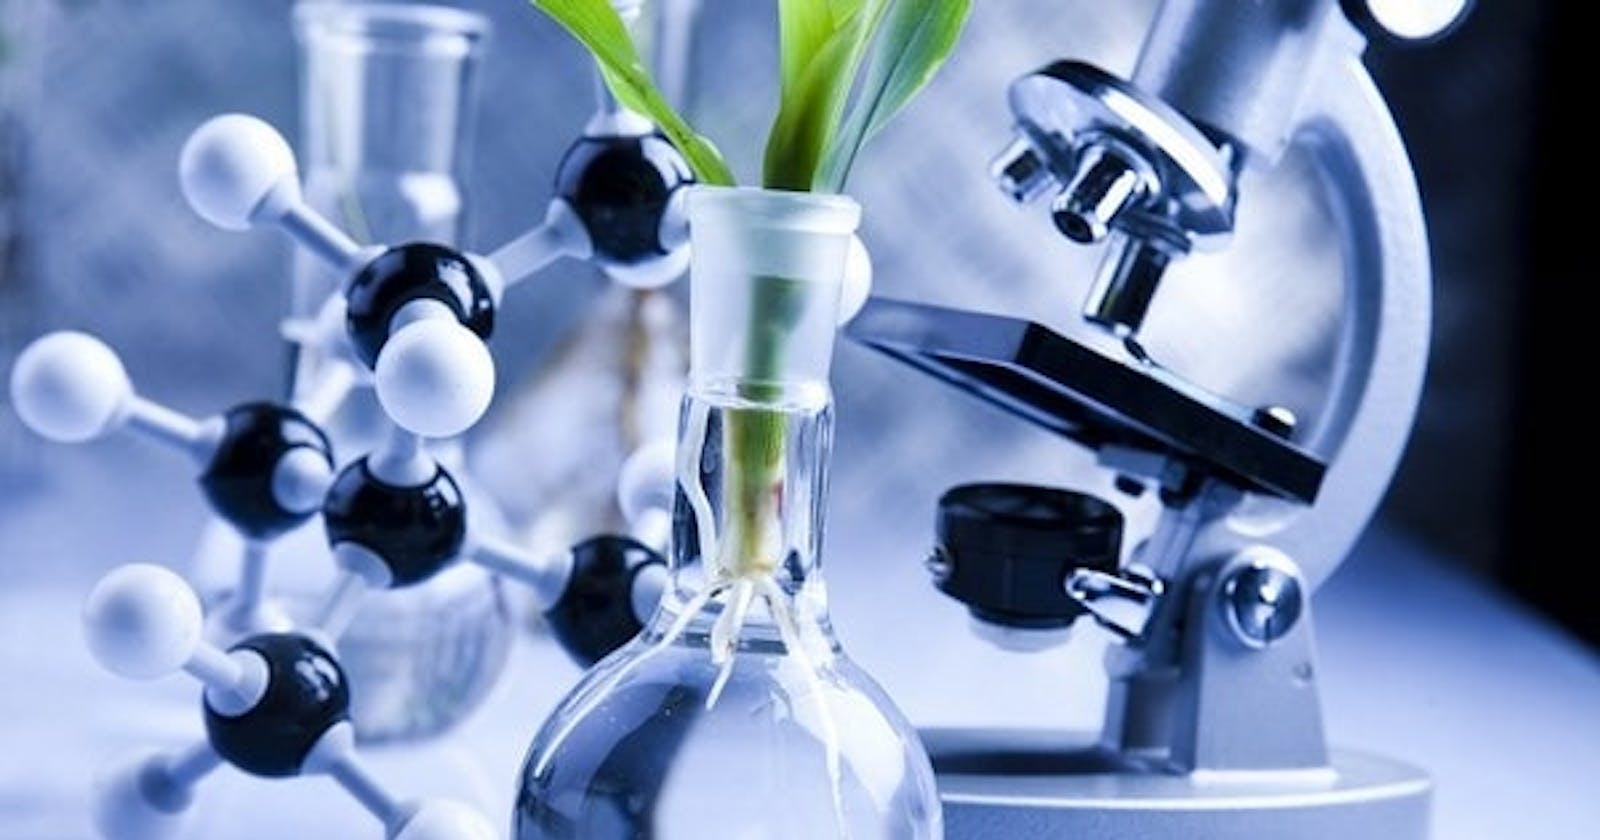 Biotech Ingredients Market Report 2021-26: Scope, Analysis, Trends, Share, Size, Demand